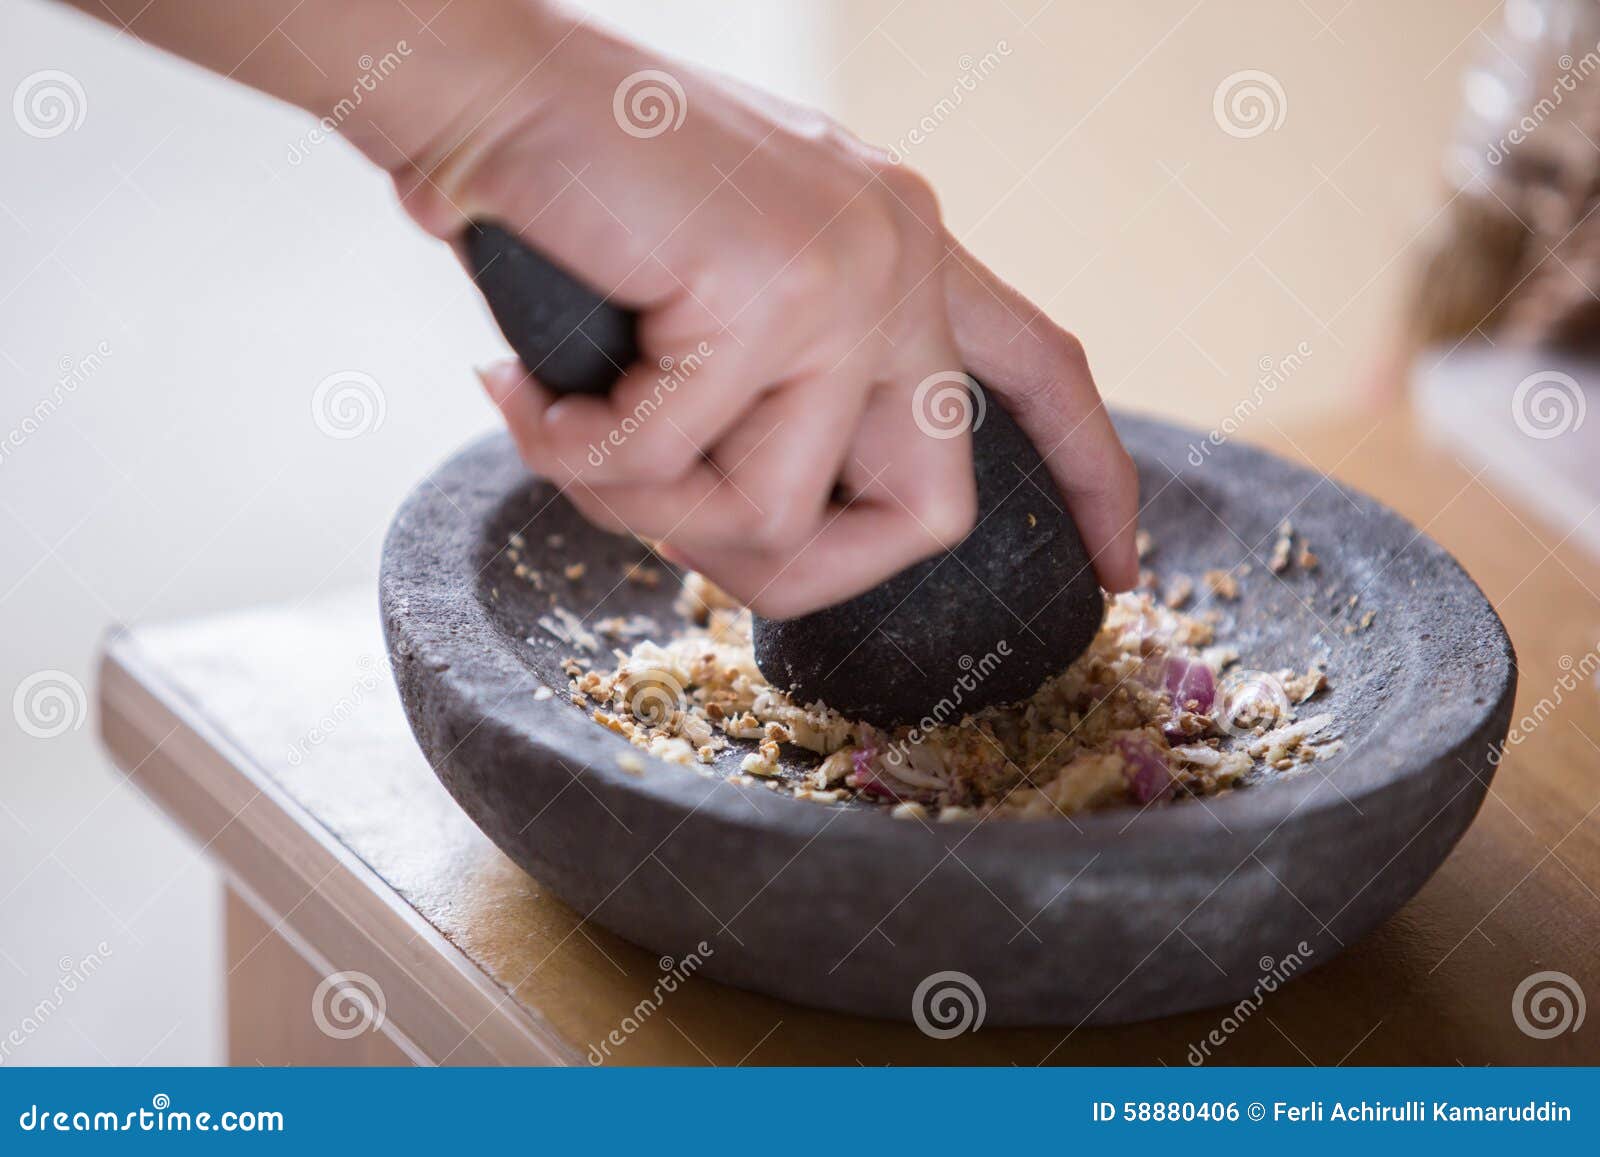 hand pounding herbs on a traditional pounder